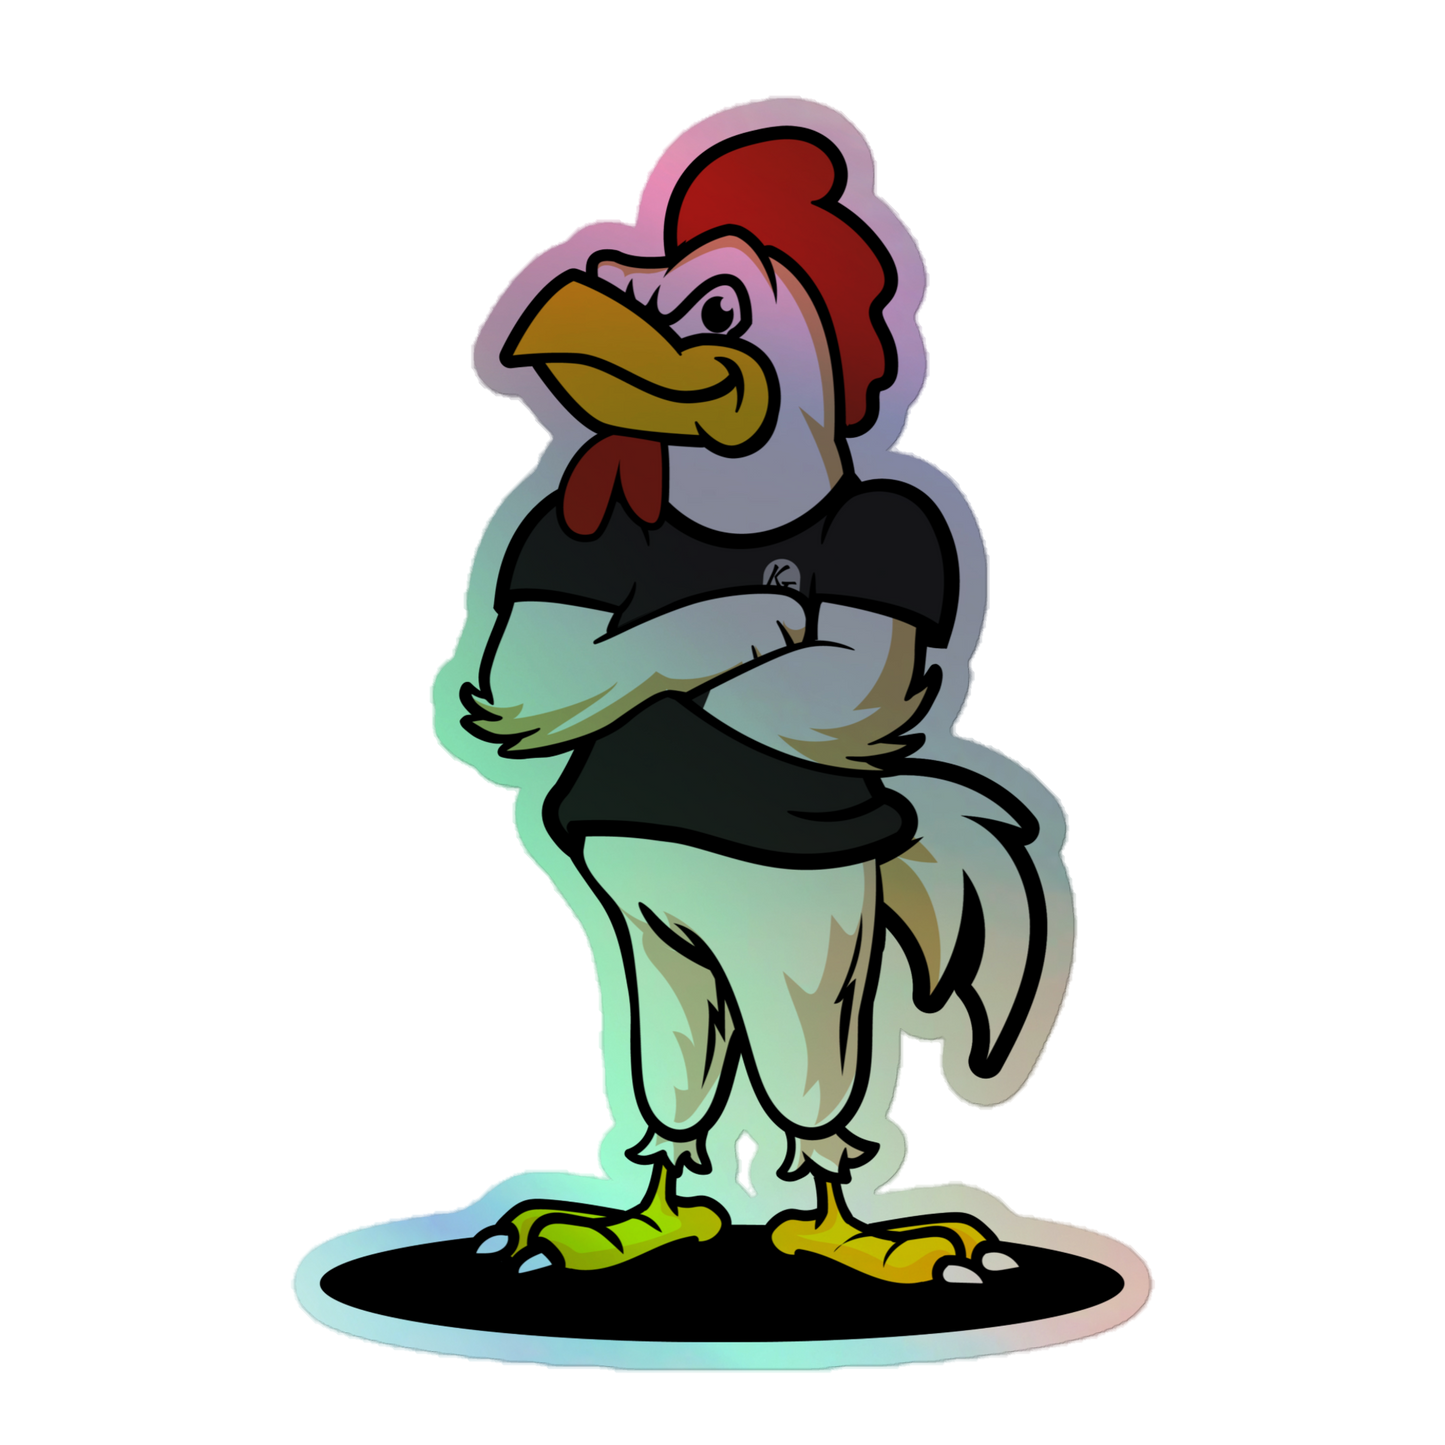 Kentucky Fried "George" Mascot Holographic stickers